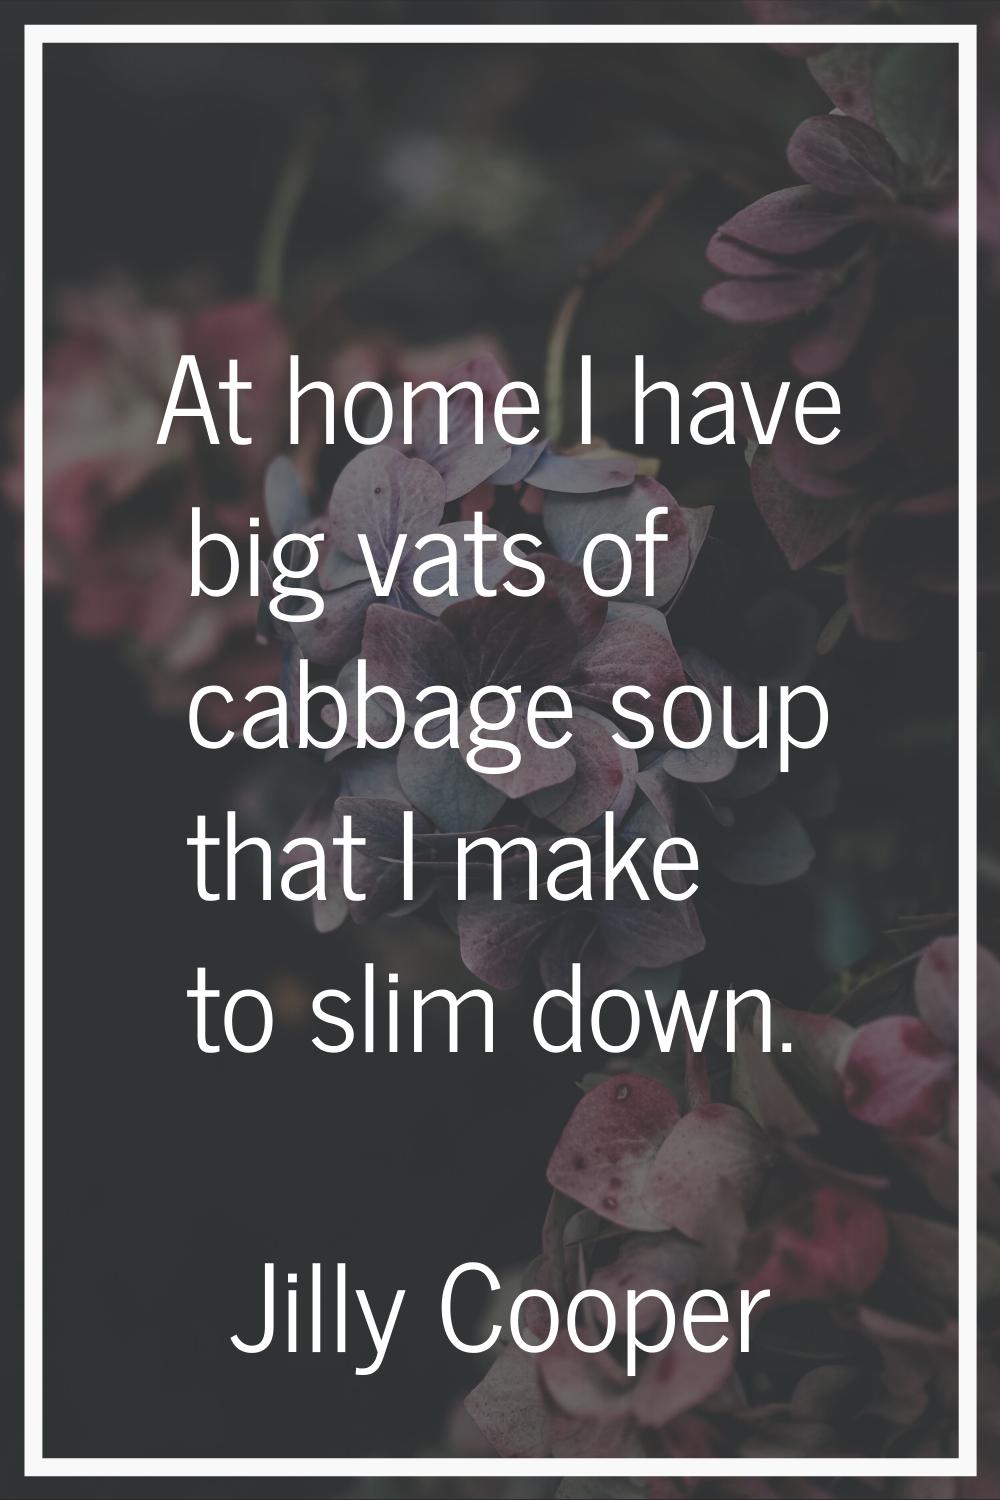 At home I have big vats of cabbage soup that I make to slim down.